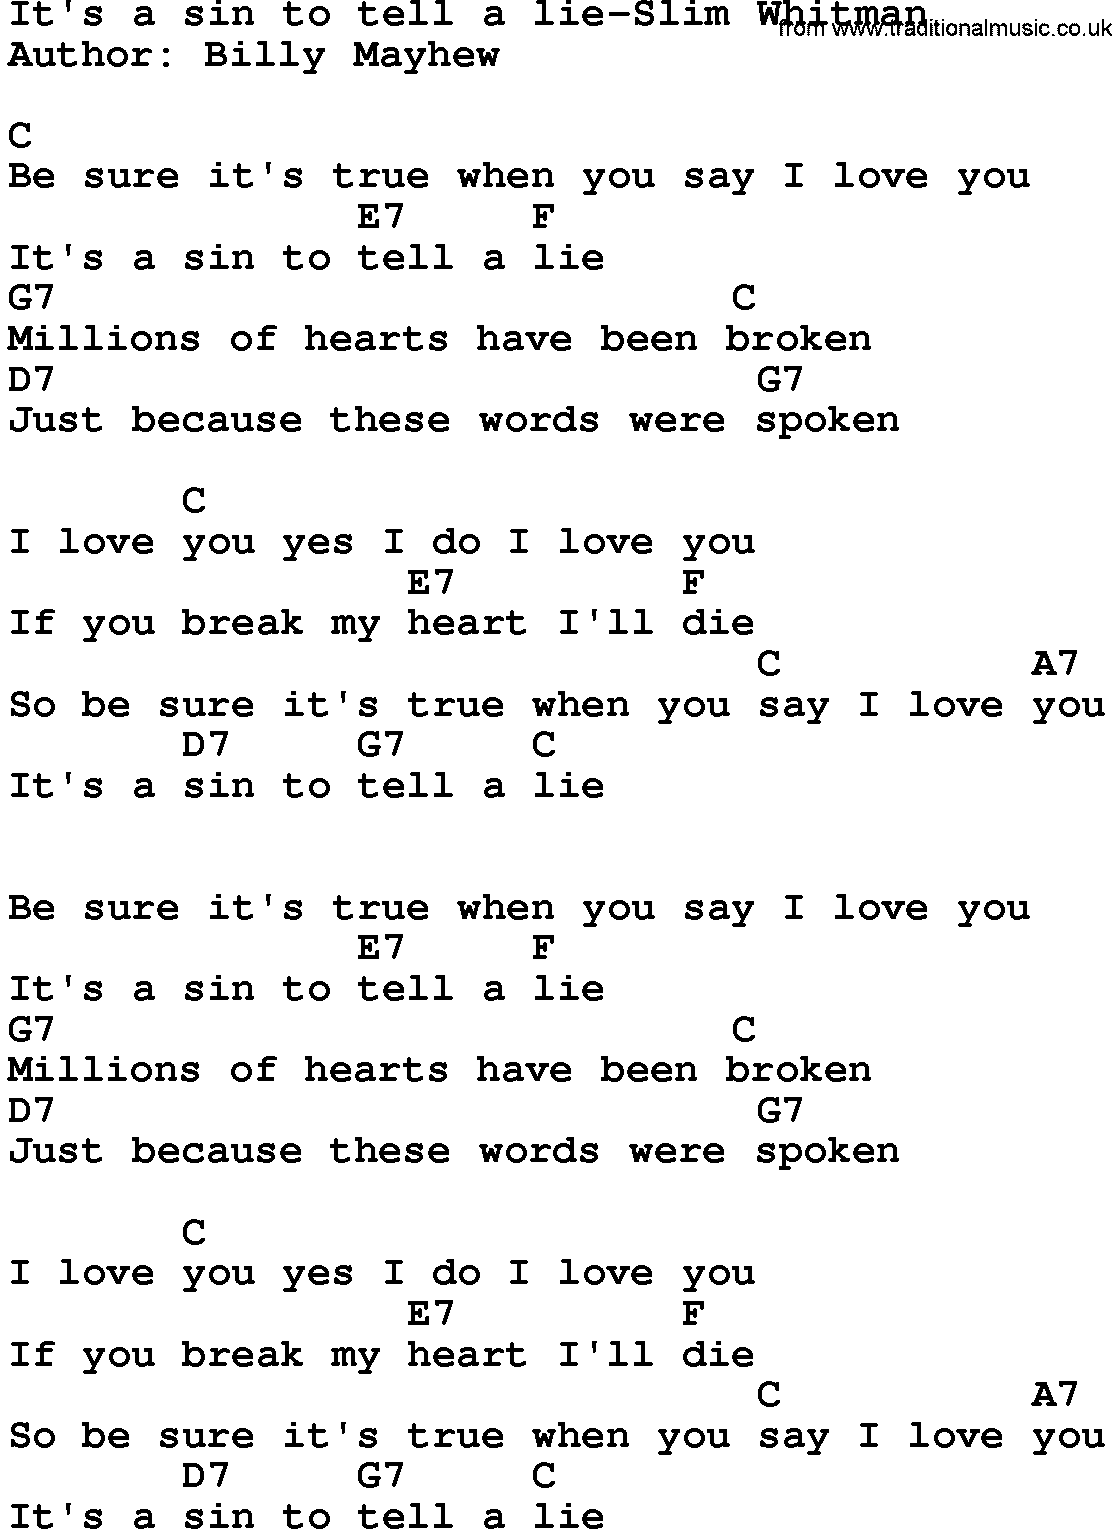 Country music song: It's A Sin To Tell A Lie-Slim Whitman lyrics and chords